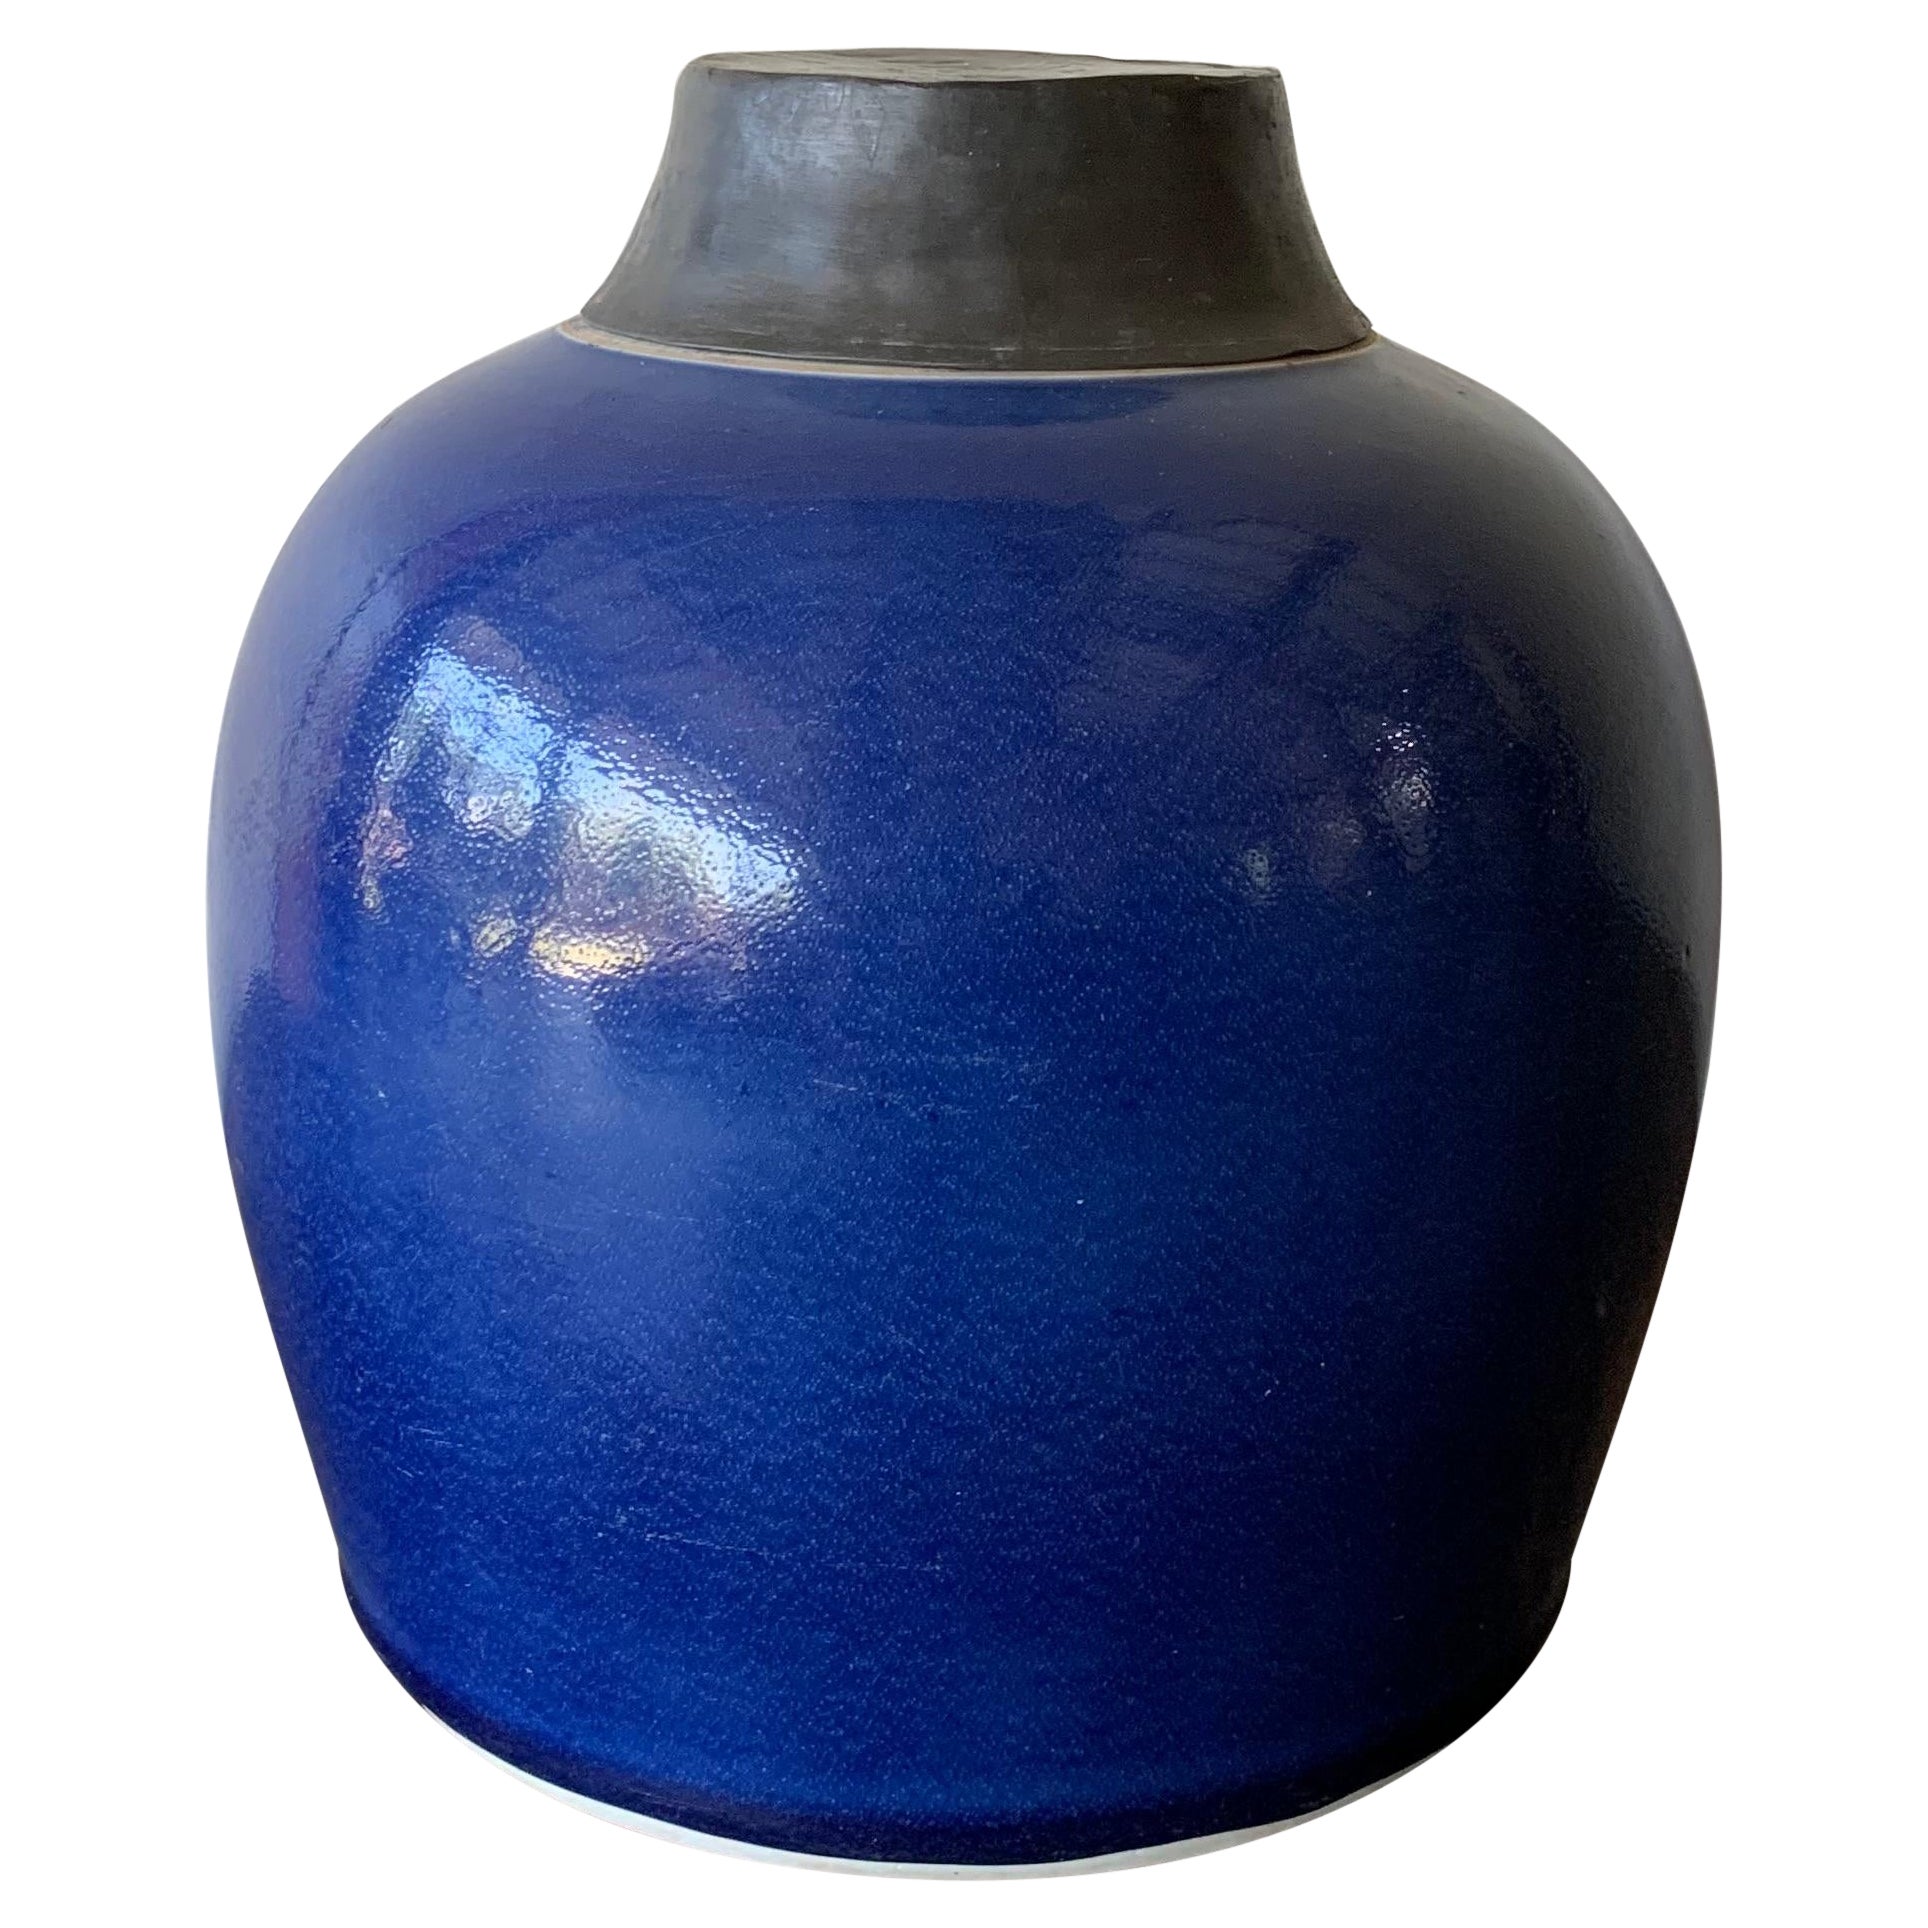 Blue Chinese Ceramic Ginger Jar with Metal Top, Early 20th Century